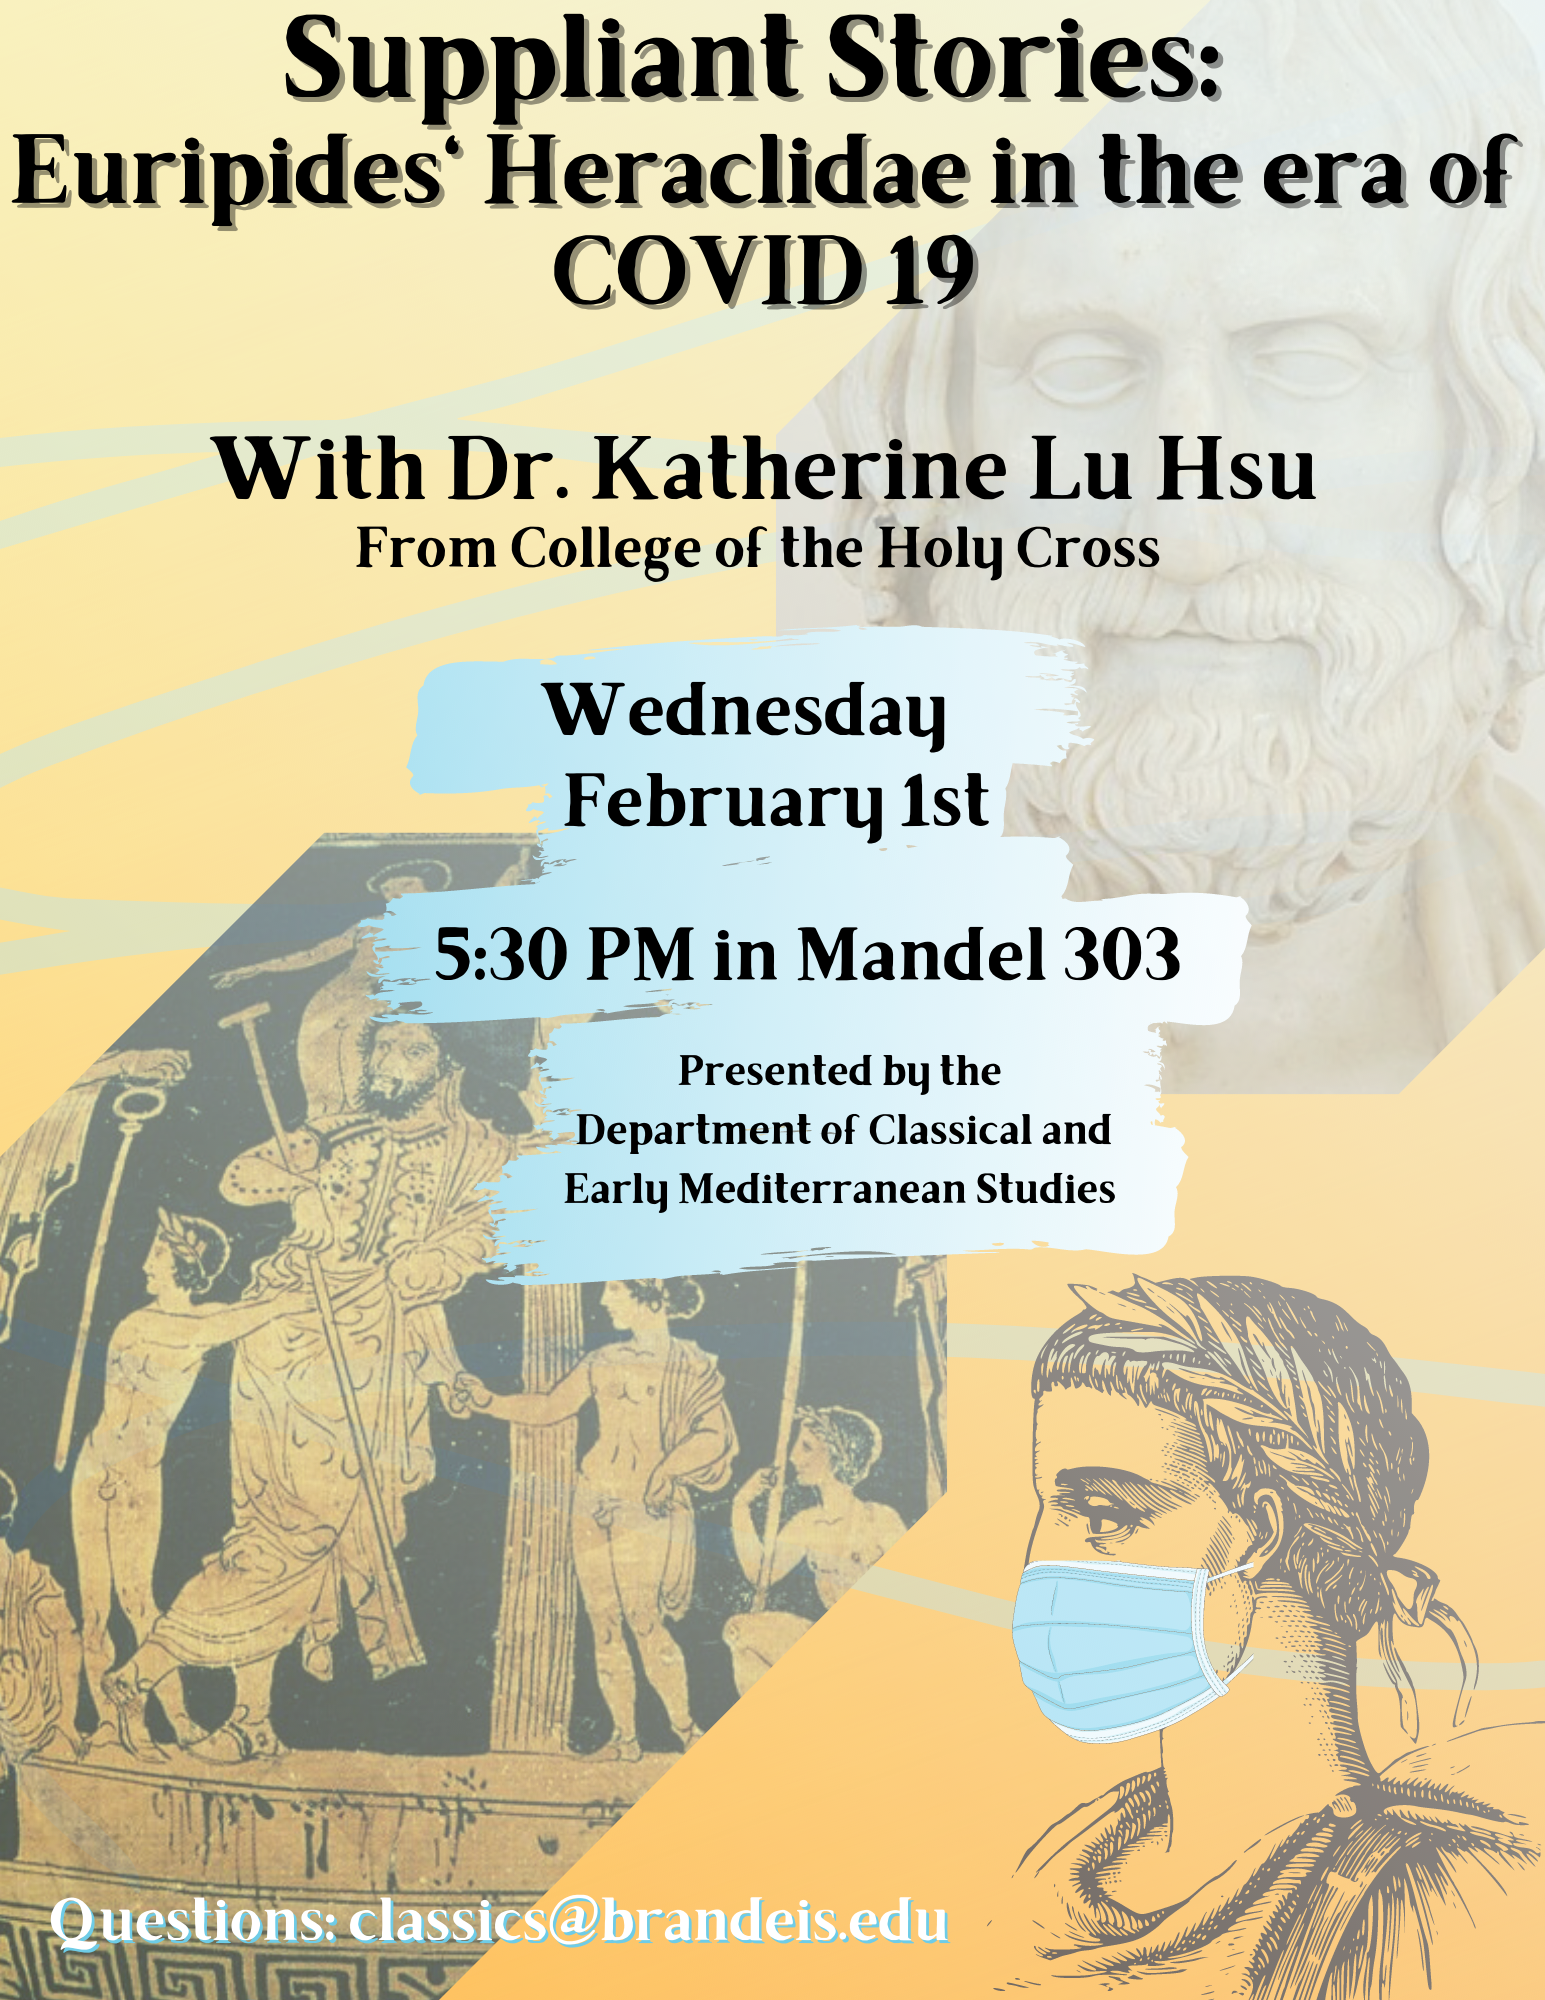 Suppliant Stories: Euripides' Heraclidae in the era of COVID 19. With Dr. Katherine Lu Hsu from College of the Holy Cross. Wednesday, February 1st at 5:30 PM in Mandel 303. Presented by the department of classical and early Mediterranean studies.